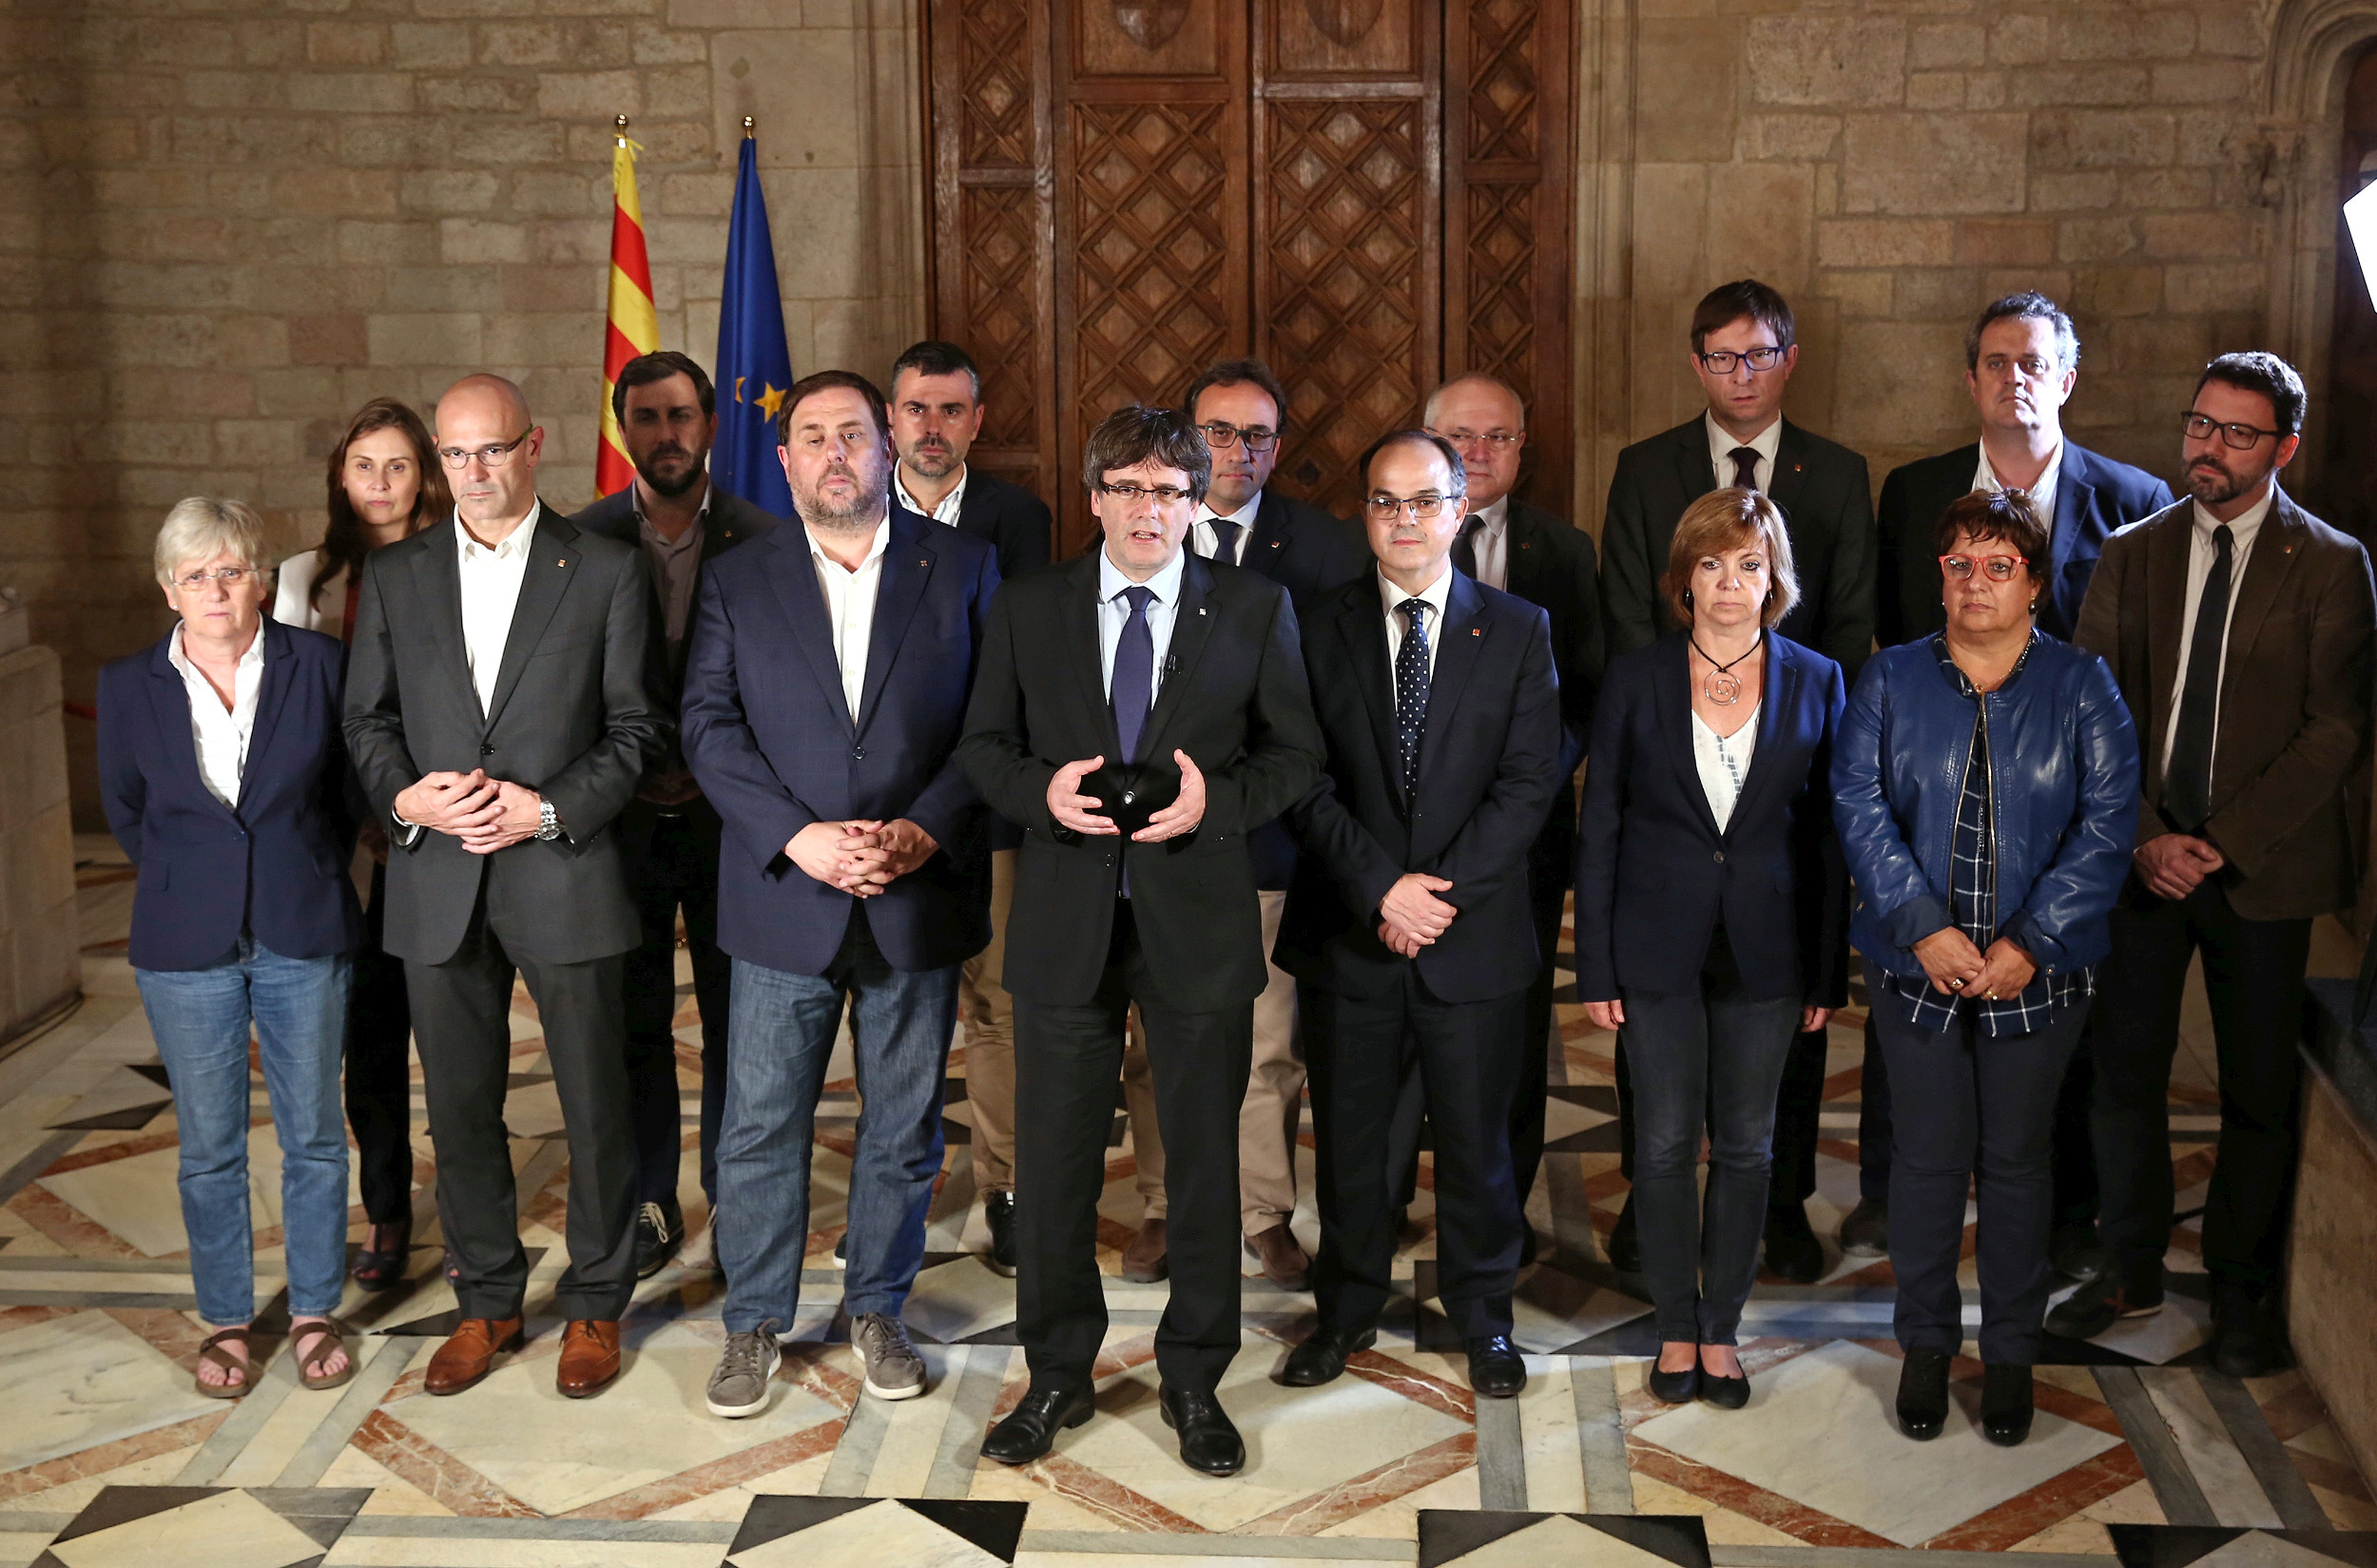 The Catalan government, with president Carles Puigdemont in the center (by ACN)